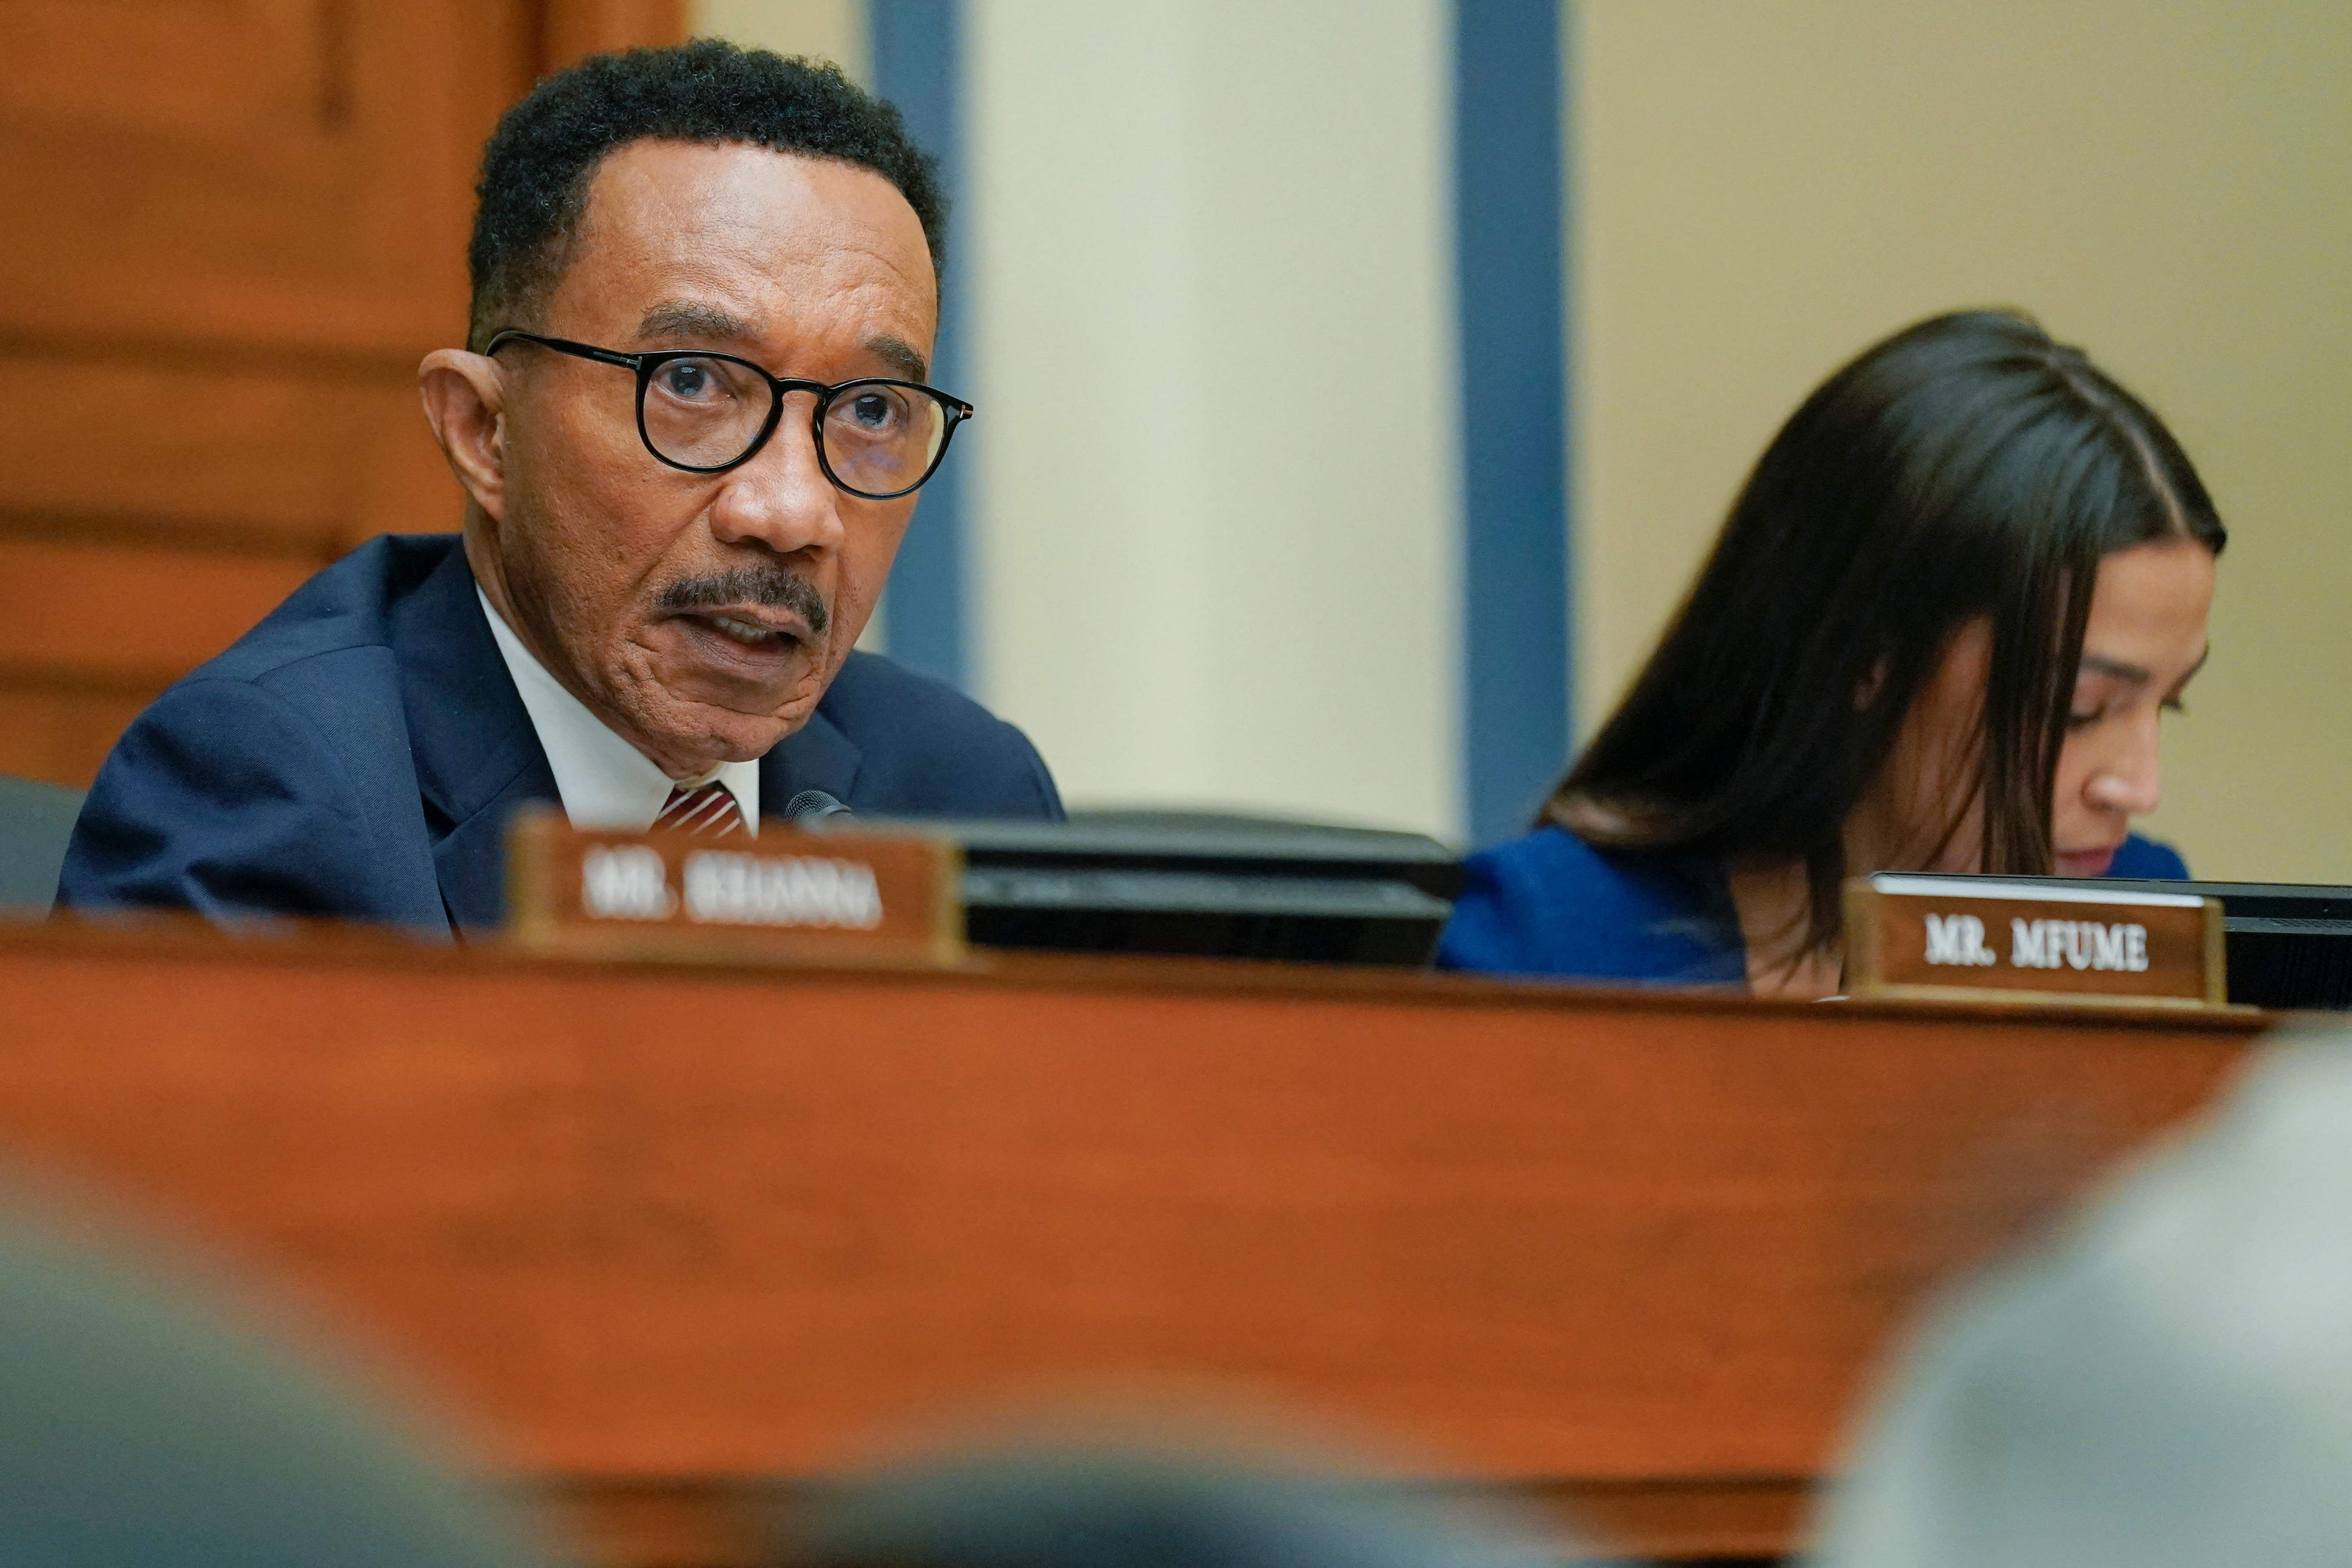 Rep. Kweisi Mfume, D-Md., speaks during a House Committee on Oversight and Reform hearing on gun violence on Capitol Hill in Washington, DC, June 8, 2022